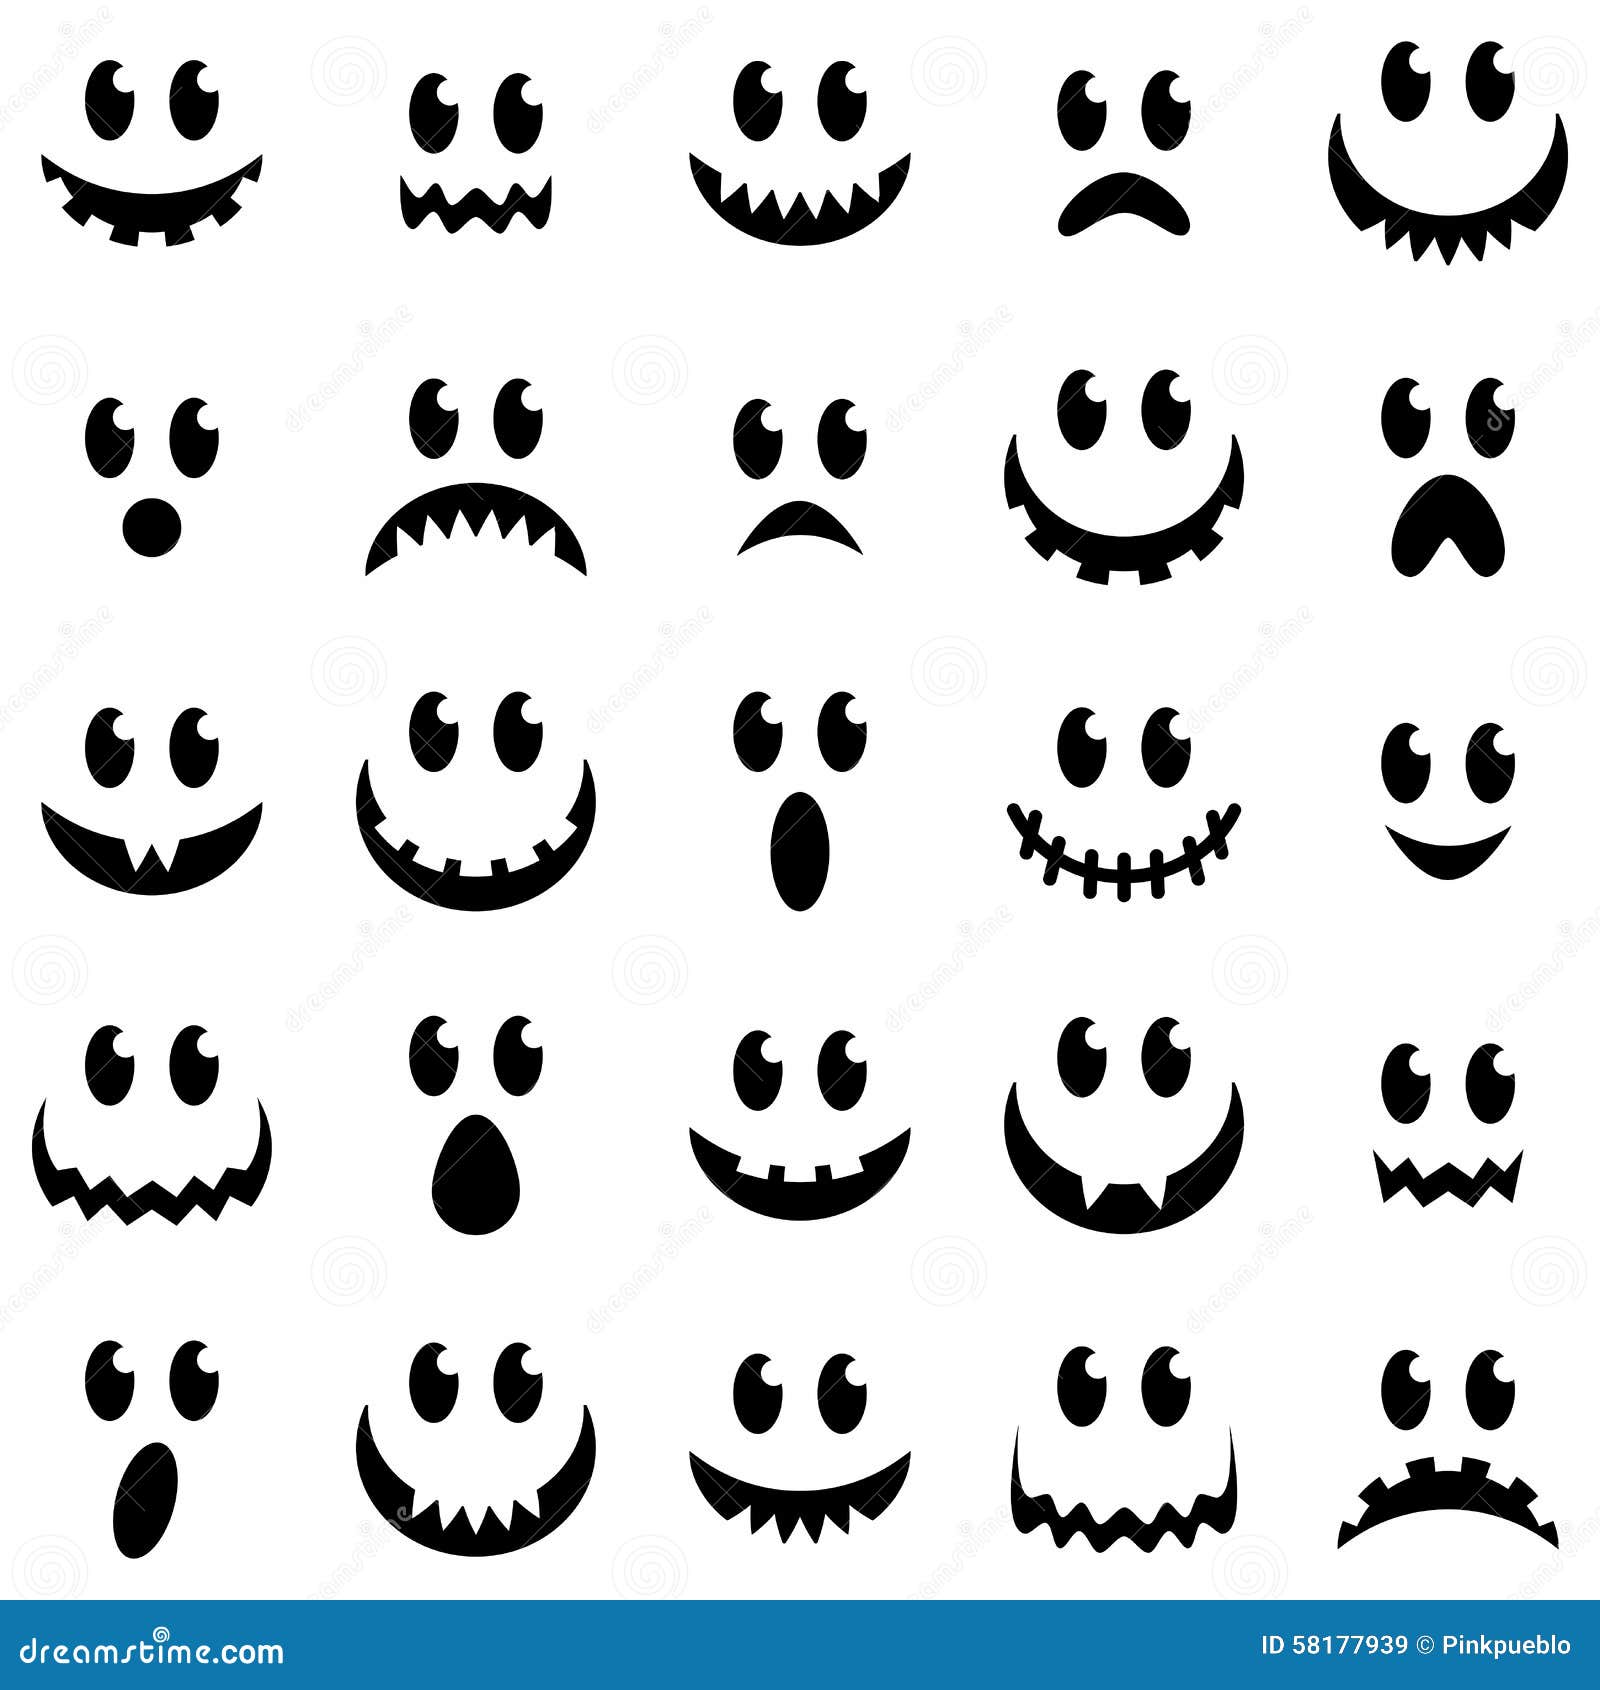  collection of spooky halloween ghost and pumpkin faces